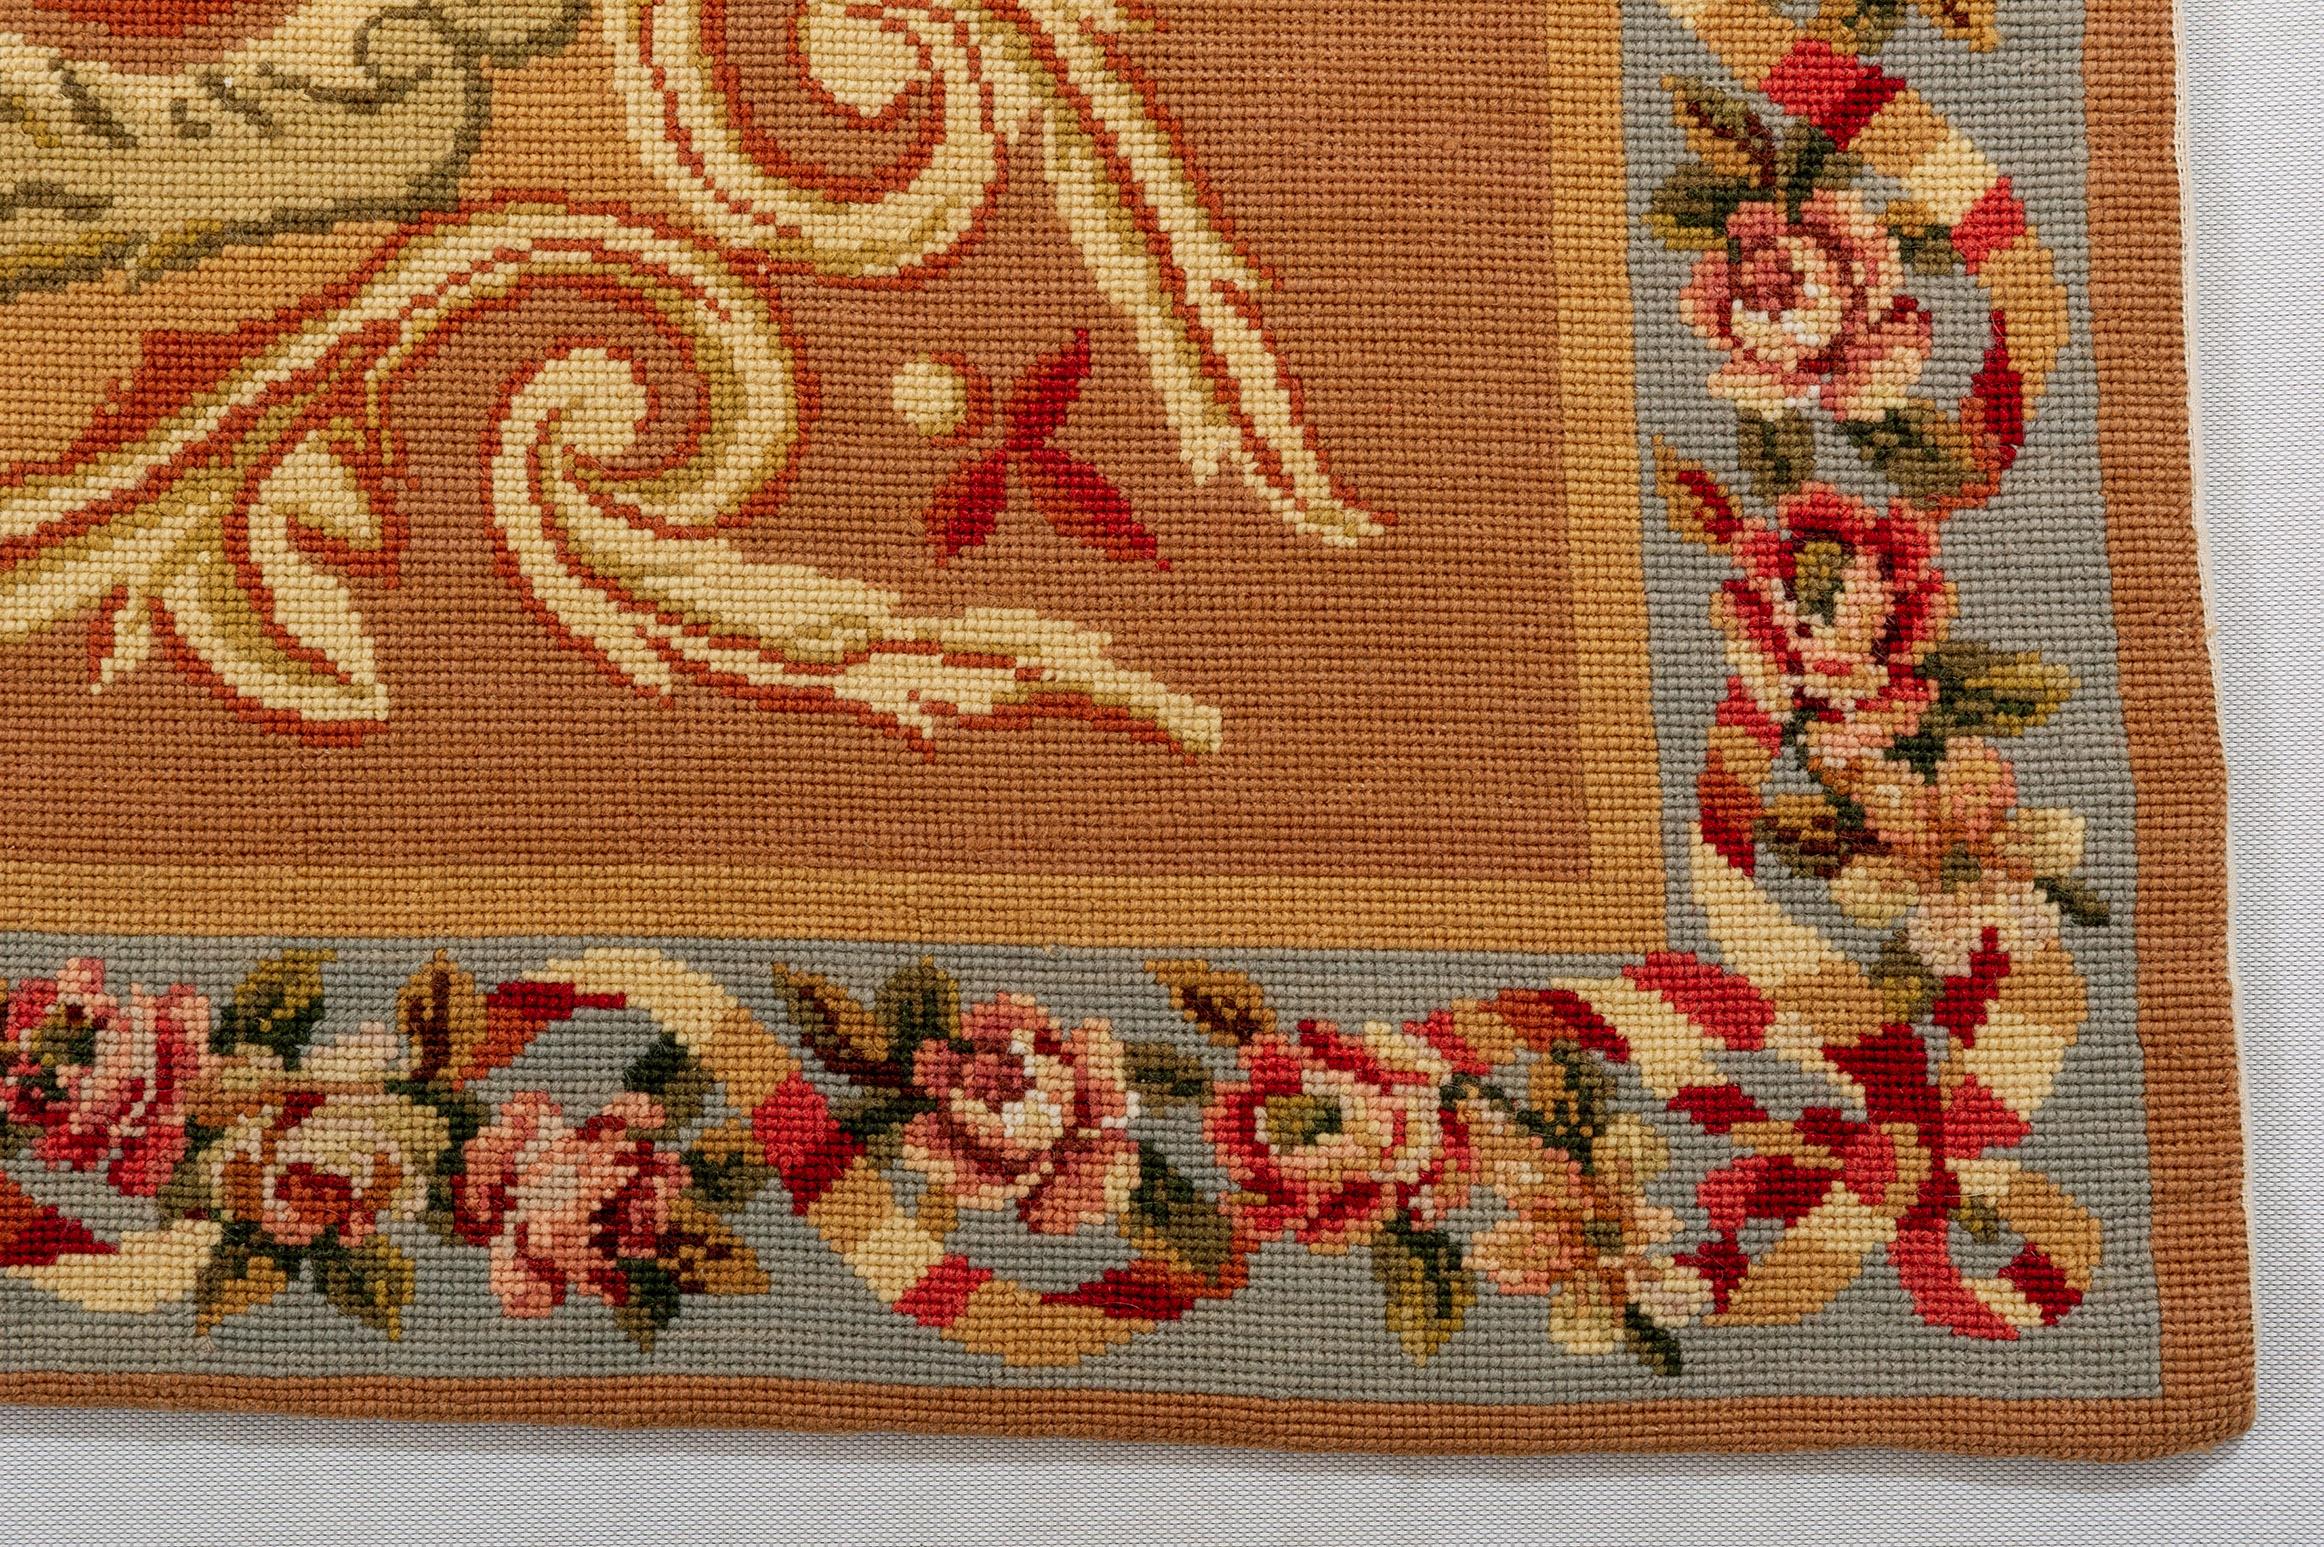 Wool Needle Point Carpet or Tapestry in Aubusson Style For Sale